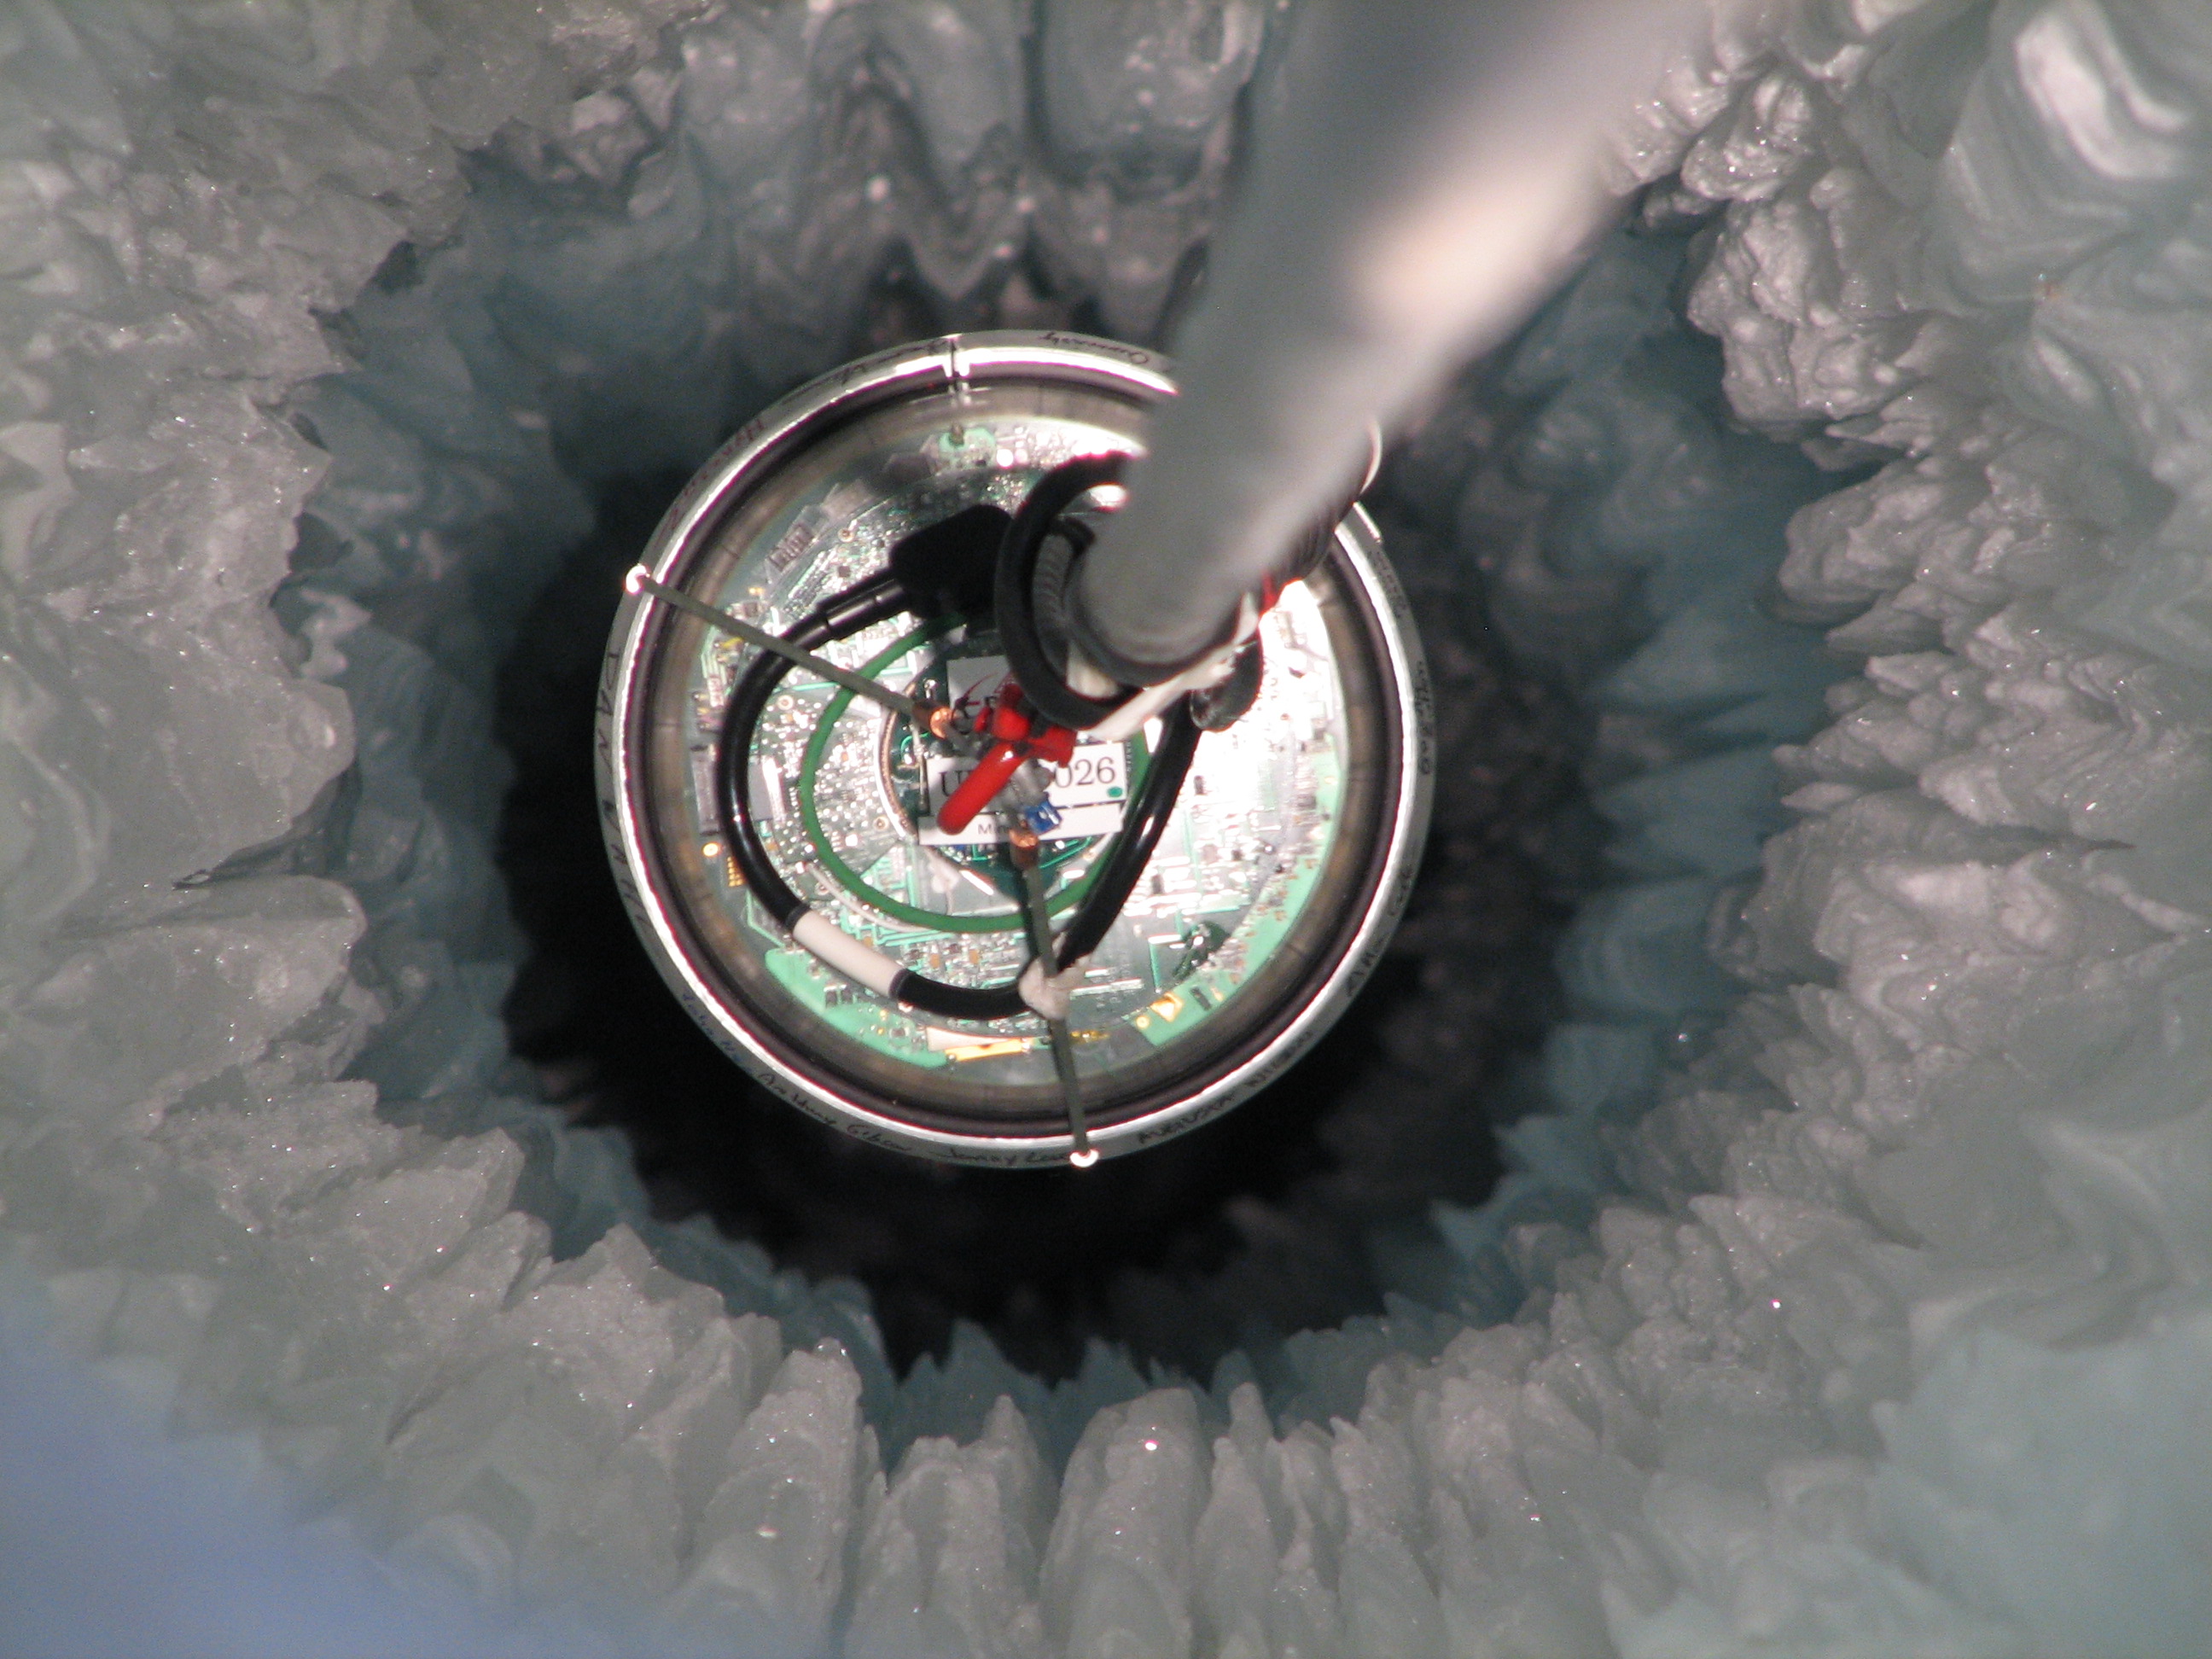 A neutrino detector about to be placed in the Antarctic ice. (Photo credit Mark Krasberg, IceCube/NSF)